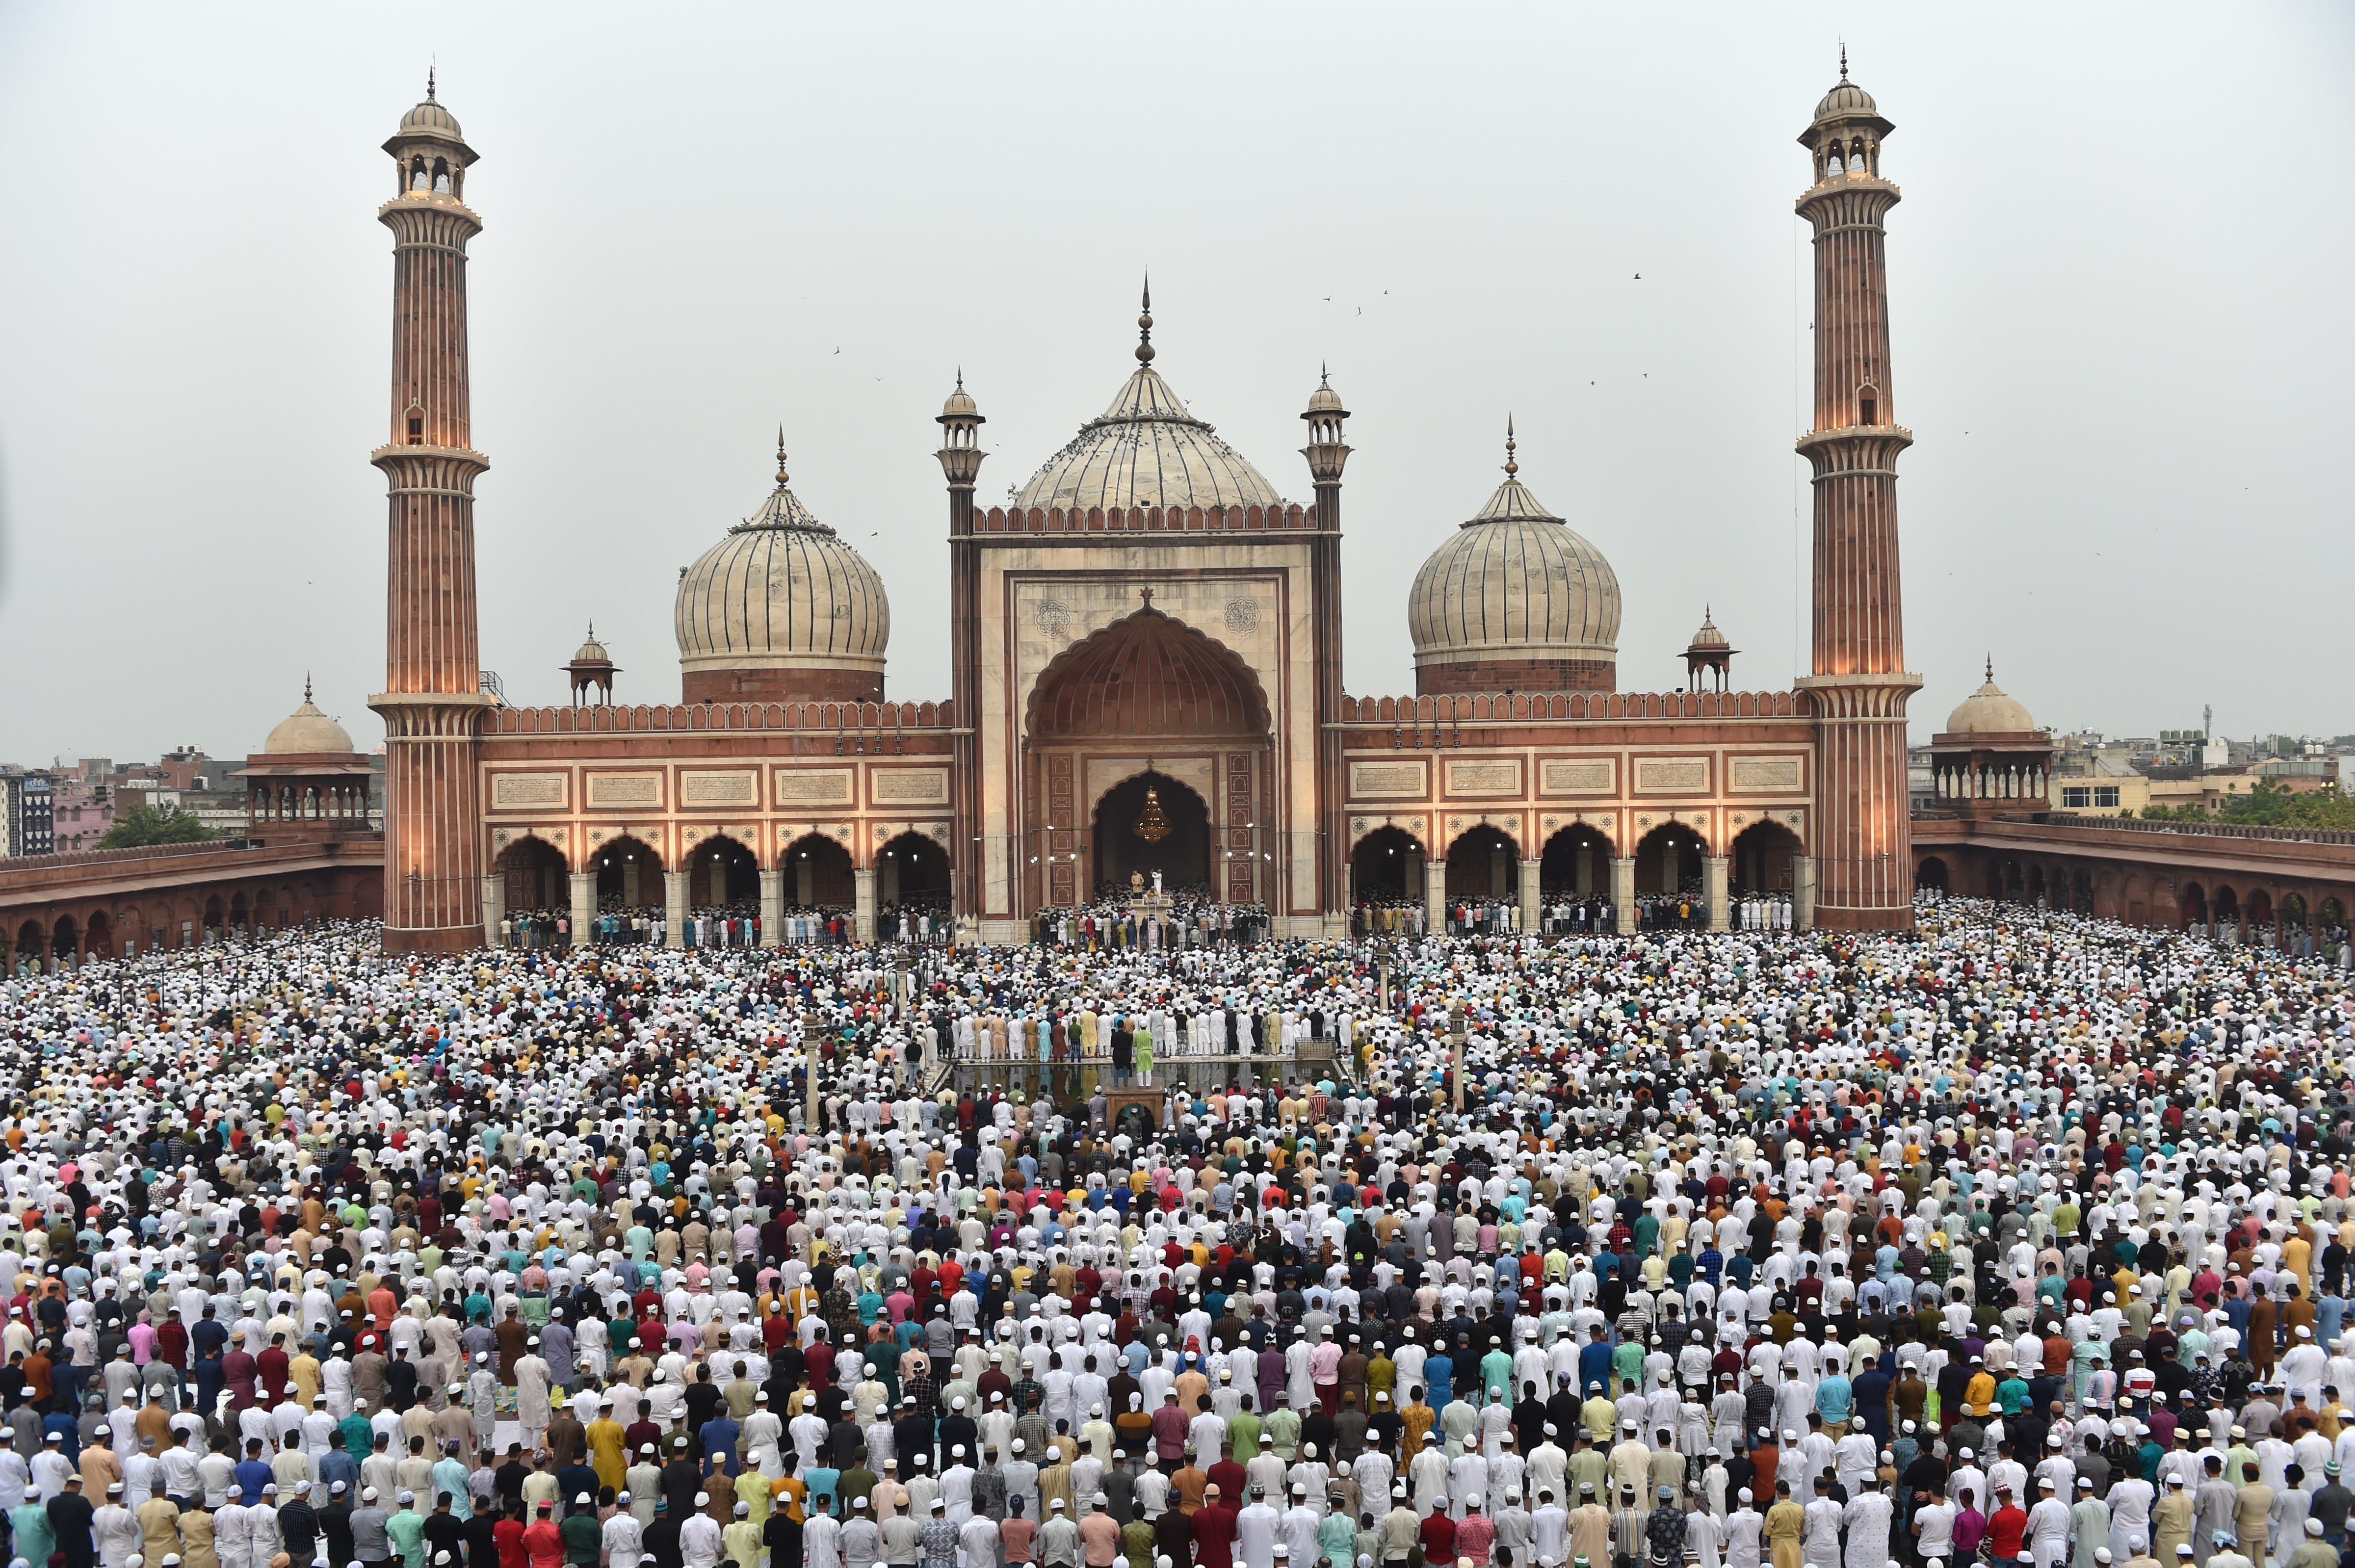 Muslims offer prayers at the Jama Masjid on the occasion of Eid-ul-Fitr, in old Delhi, Tuesday, May 3, 2022. Muslims across the world celebrate Eid with zeal and grandeur. (PTI Photo)